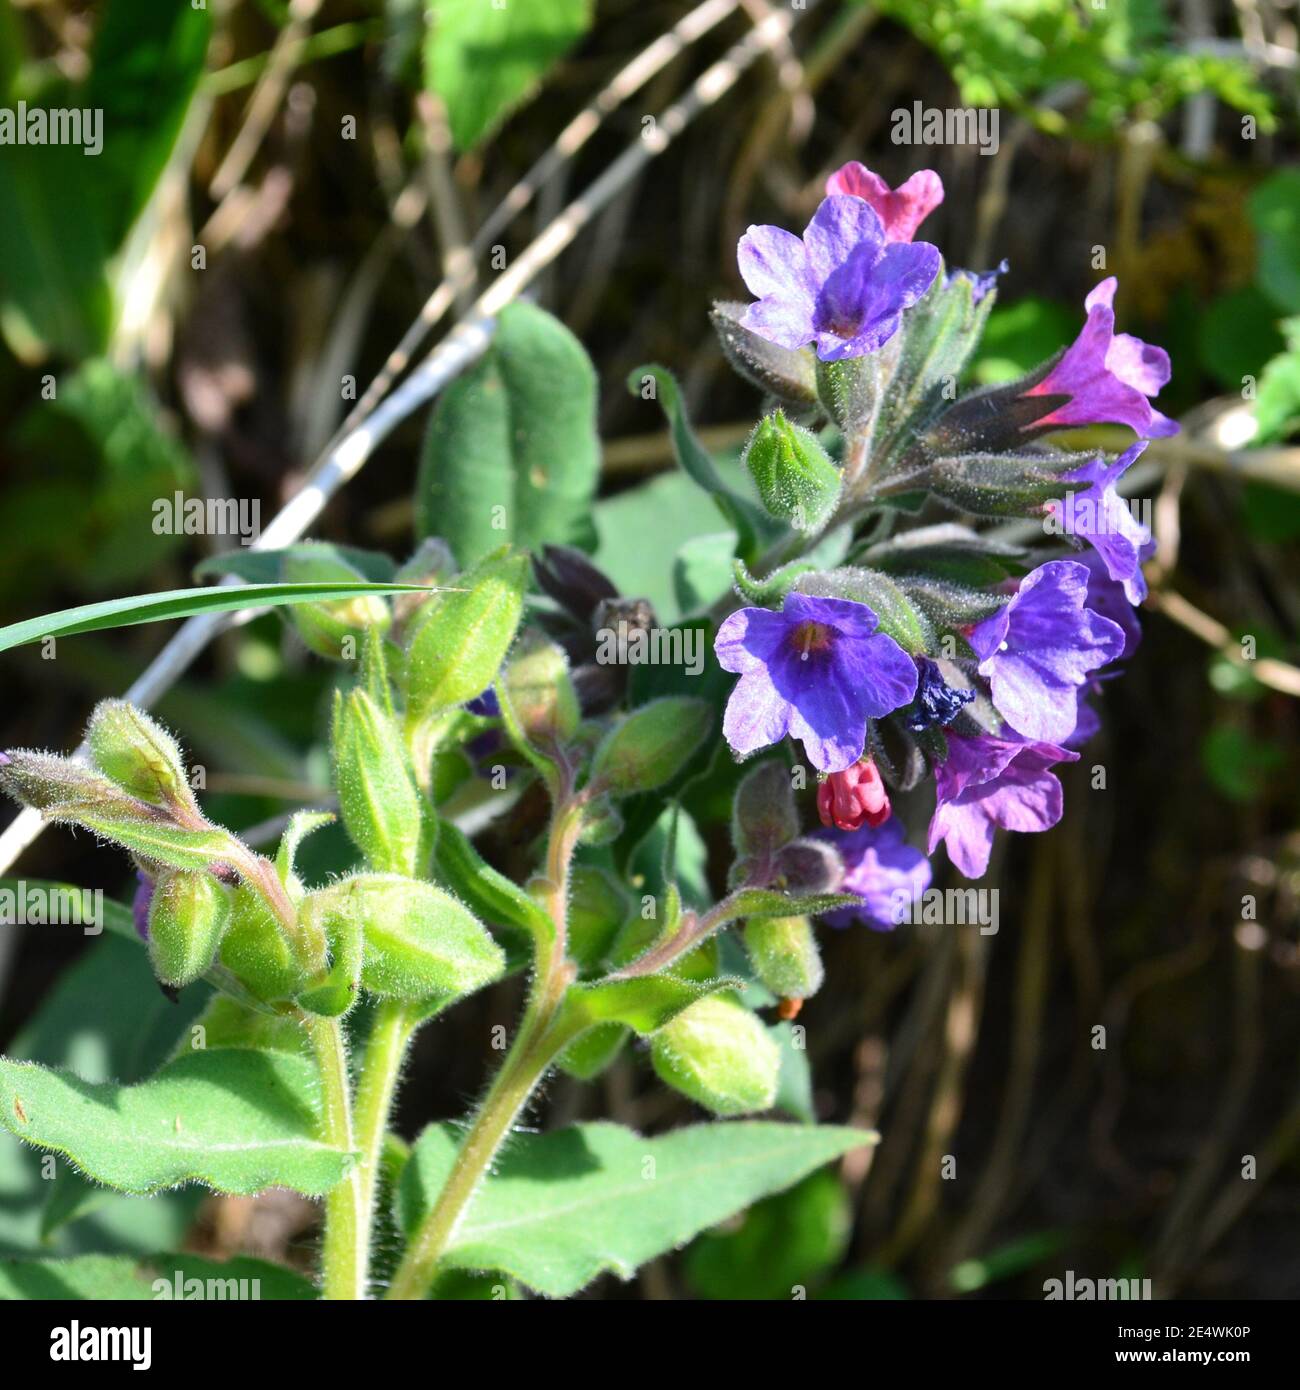 Pulmonaria officinalis, common lungwort (also known as Mary's tears or Our Lady's milk drops)  in the garden Stock Photo